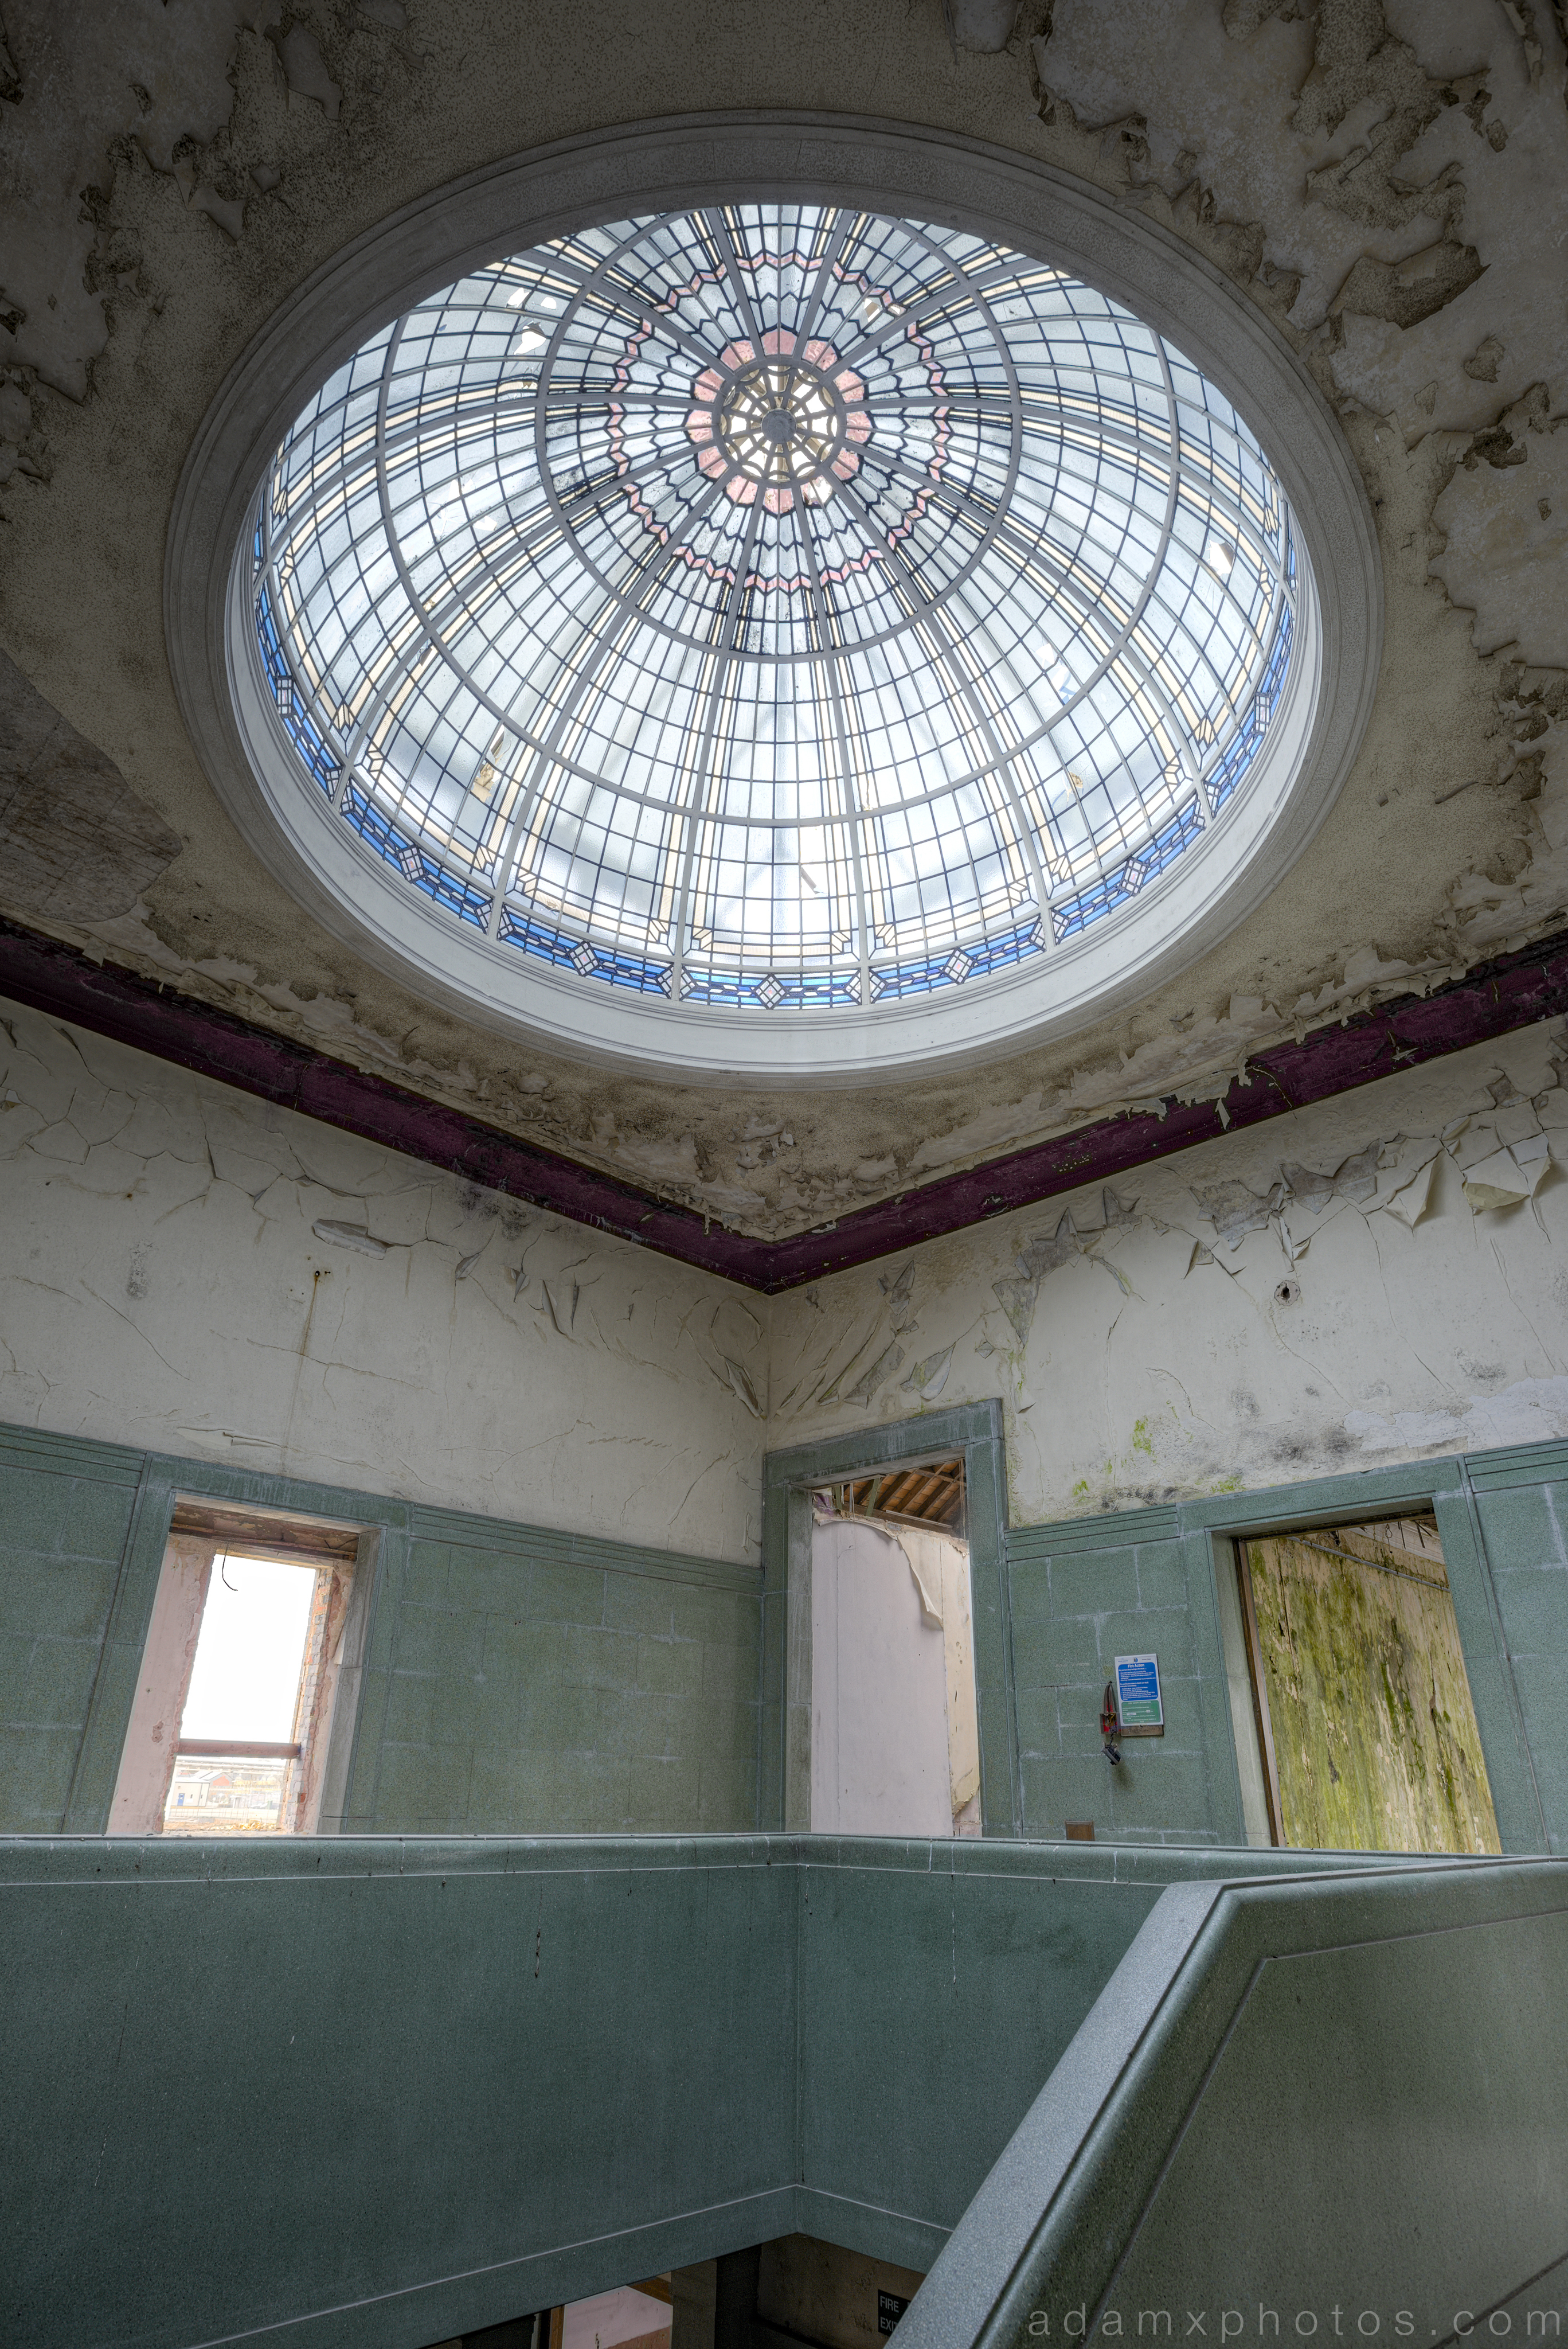 Looking up ceiling Fisons Sanofi Aventis Admin dome glass Urbex Urban exploration Adam X Urban Exploration Photo photos photographs UK March 2015 report abandoned disused derelict decay decayed